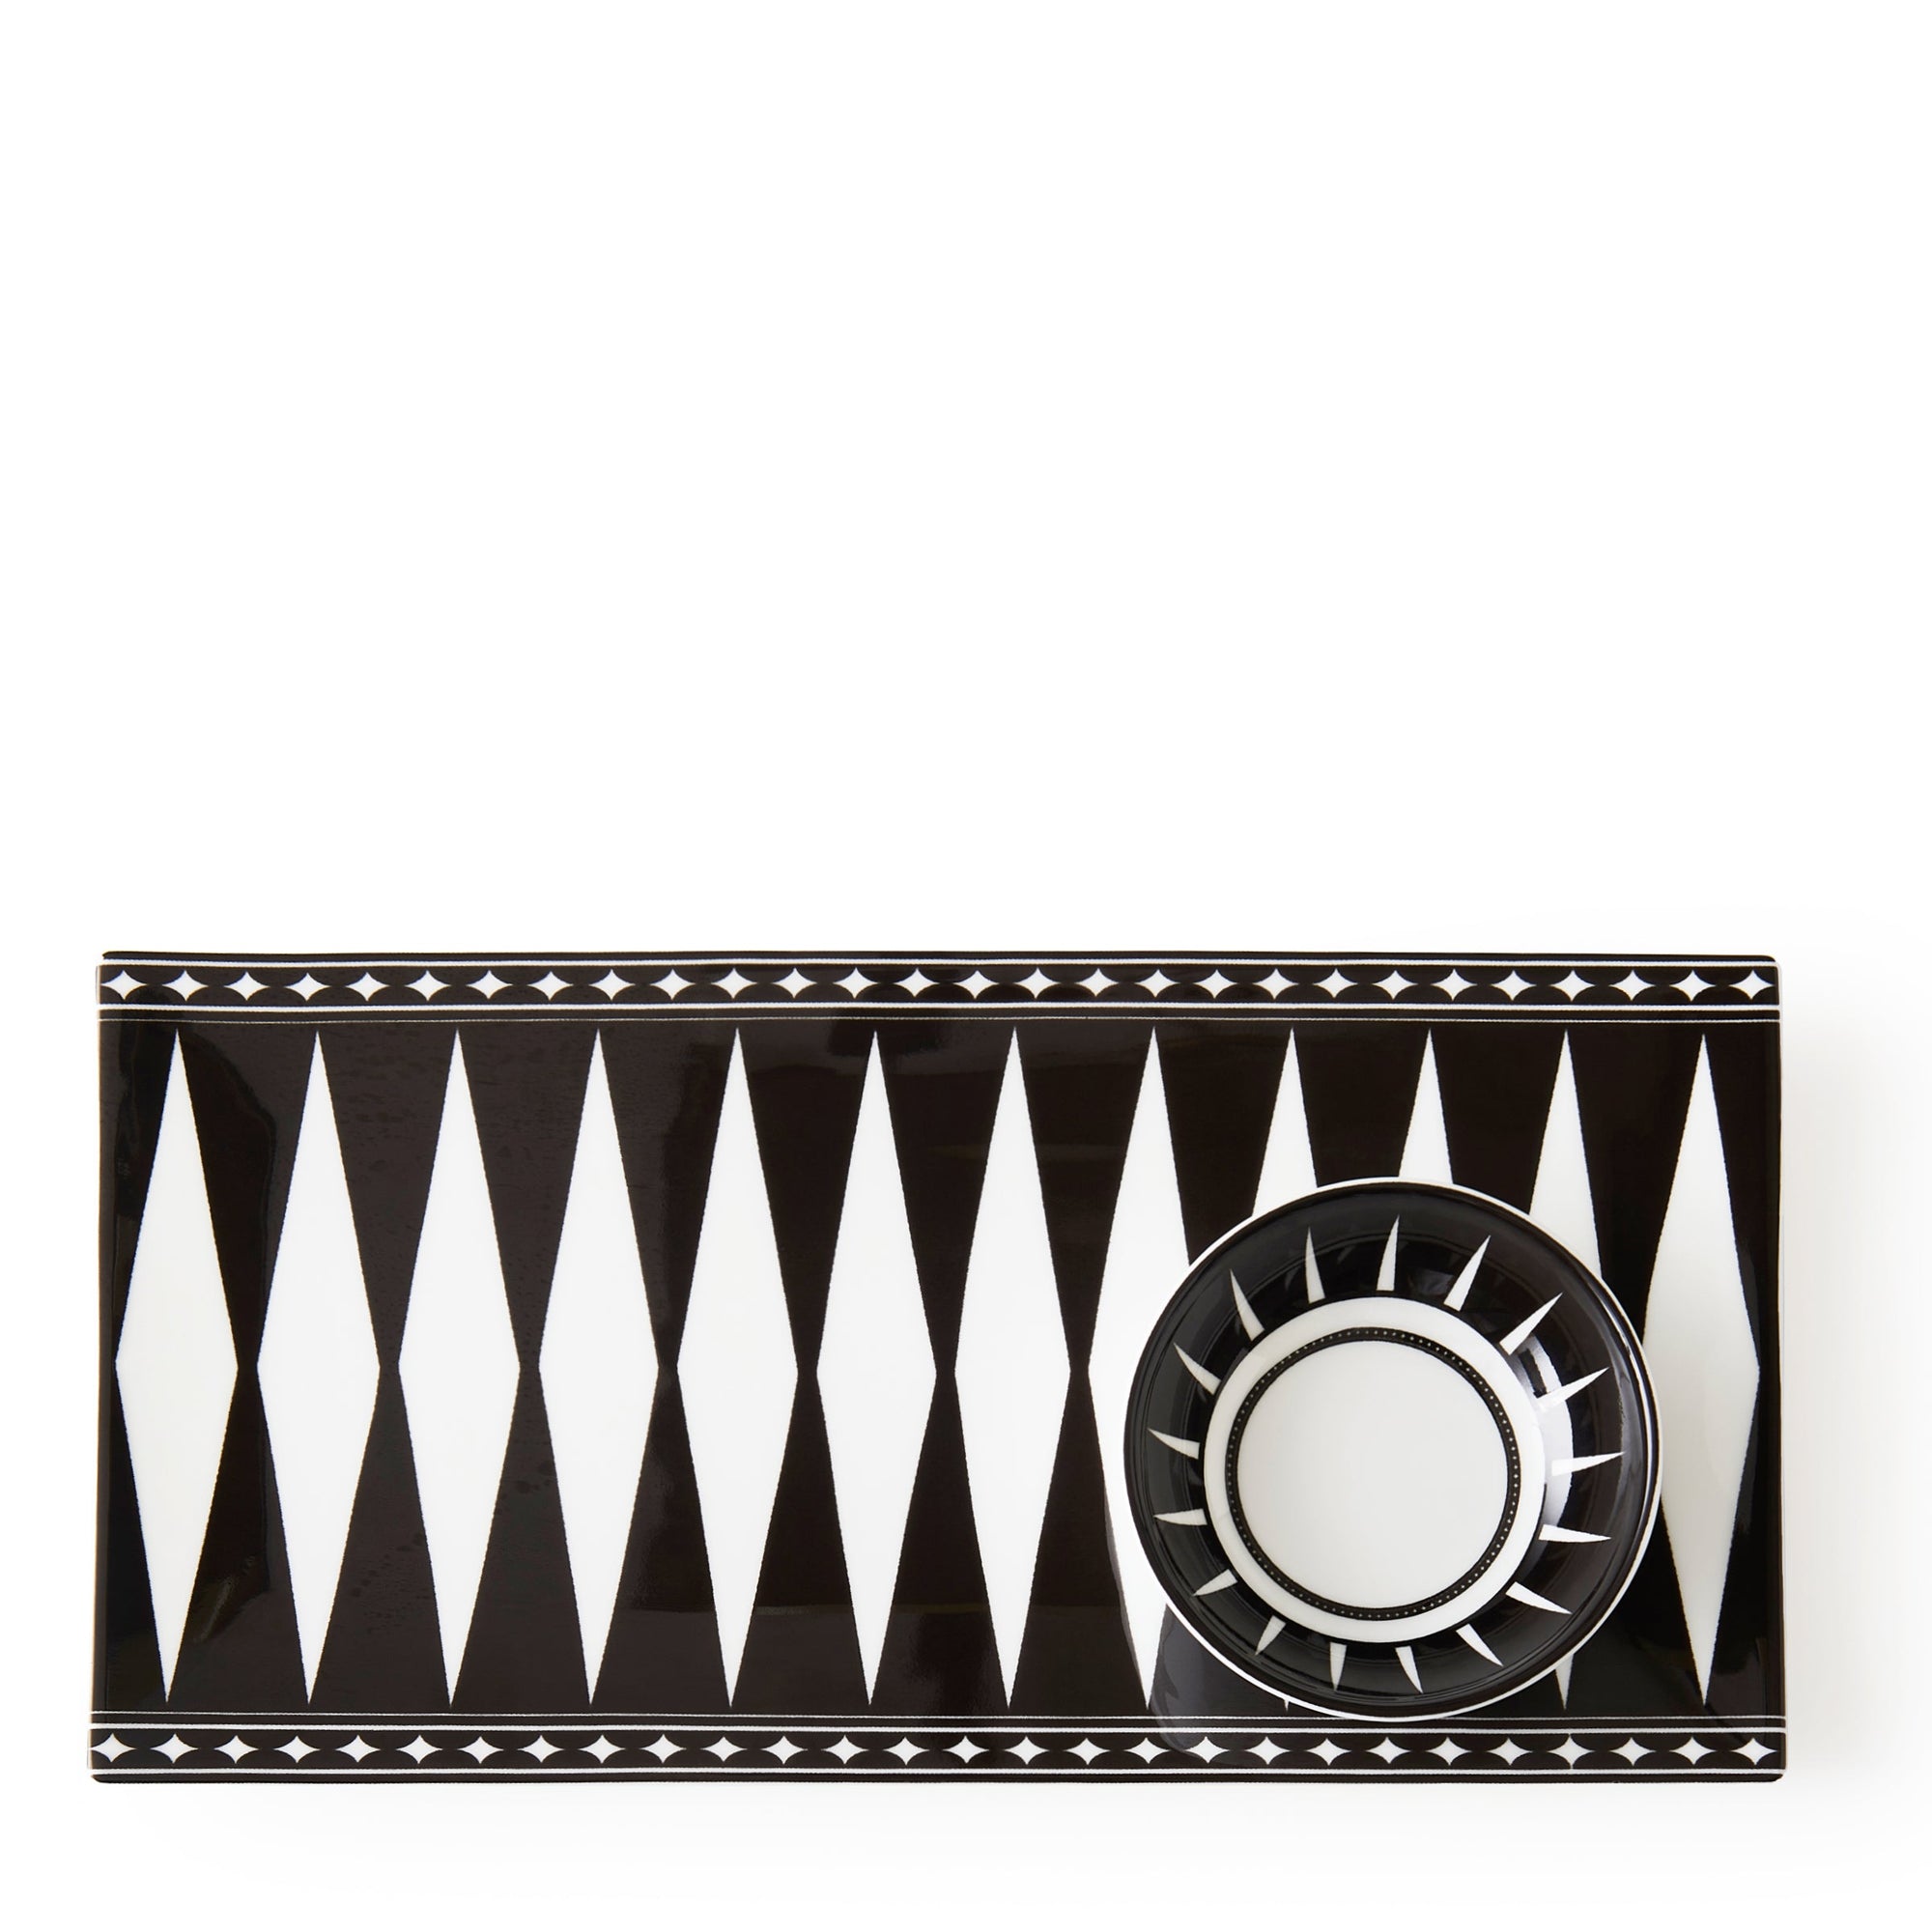 A rectangular bone china tray featuring a black and white geometric pattern with a diamond design along the center and a border of small triangles, perfect for serving appetizers, the Marrakech Large Sushi Tray by Caskata.